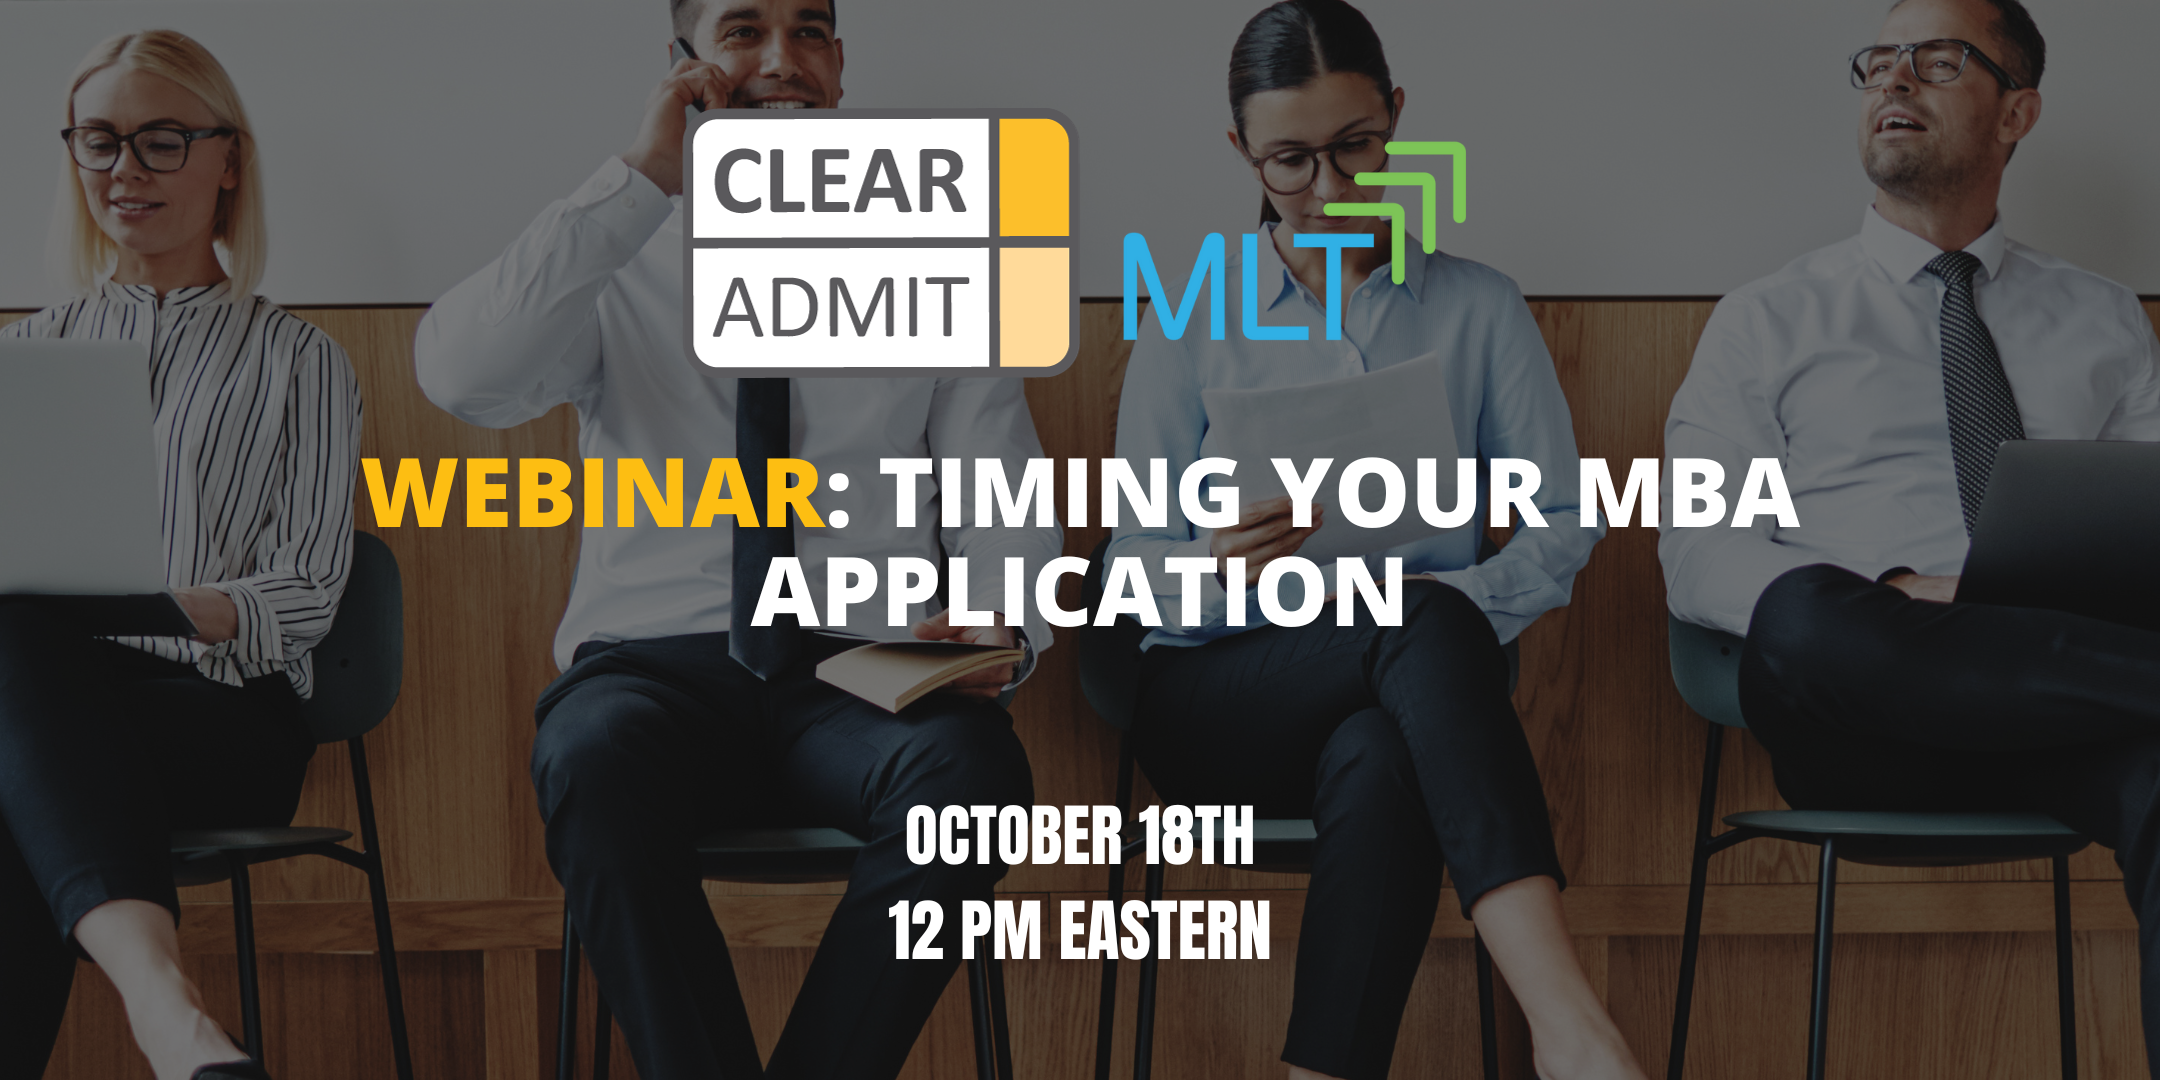 Image for Webinar: Timing Your MBA Application | Clear Admit & MLT